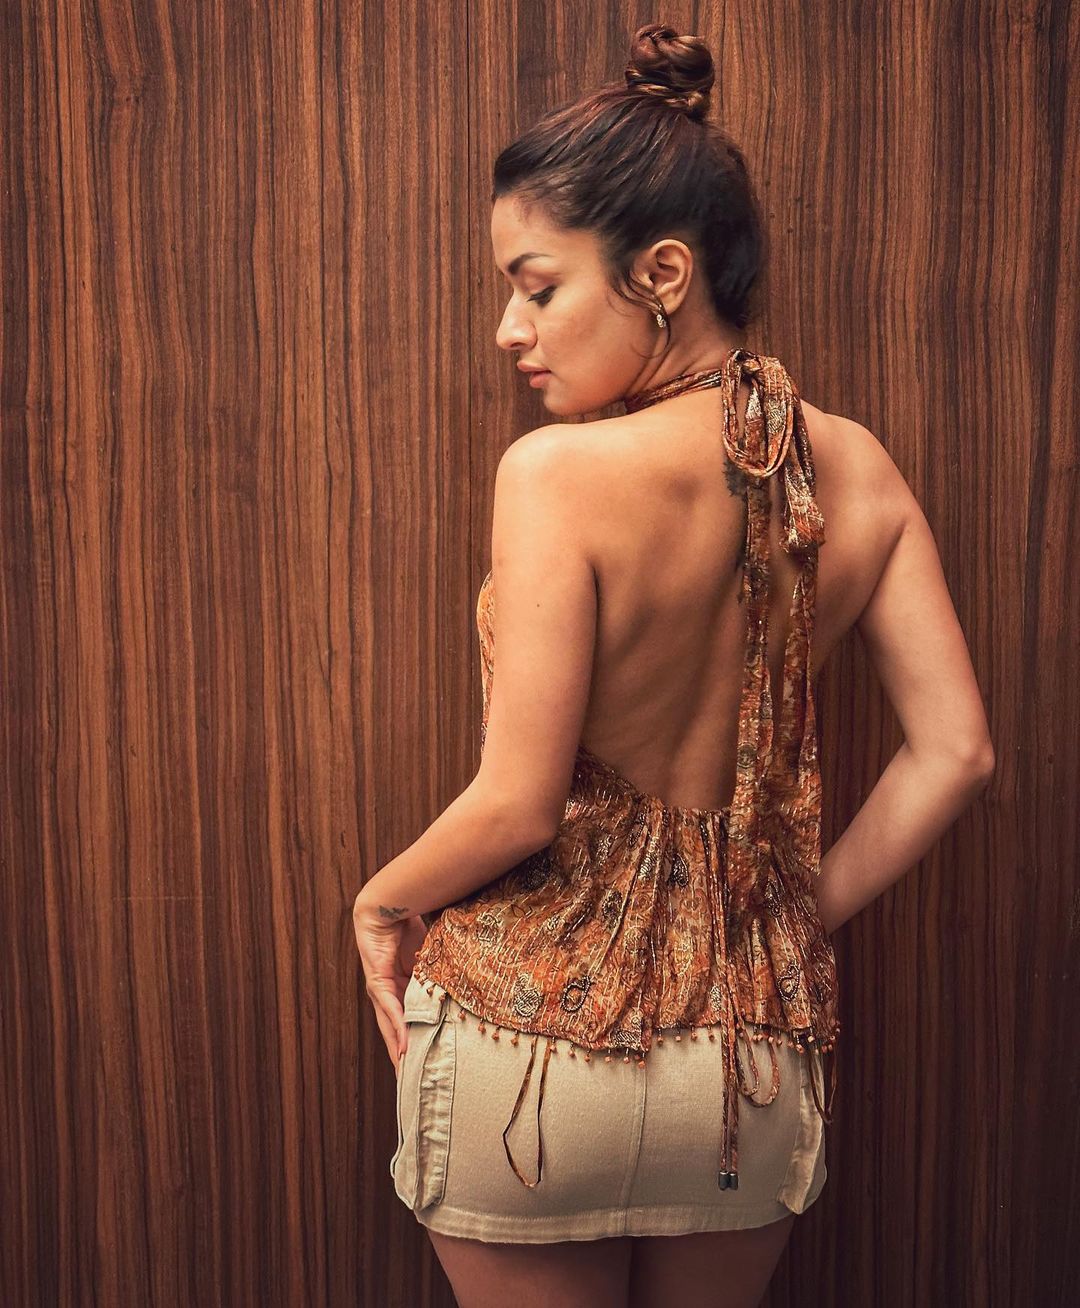 Avneet Kaur showed her glamor in backless top, see the beauty of the actress 11561